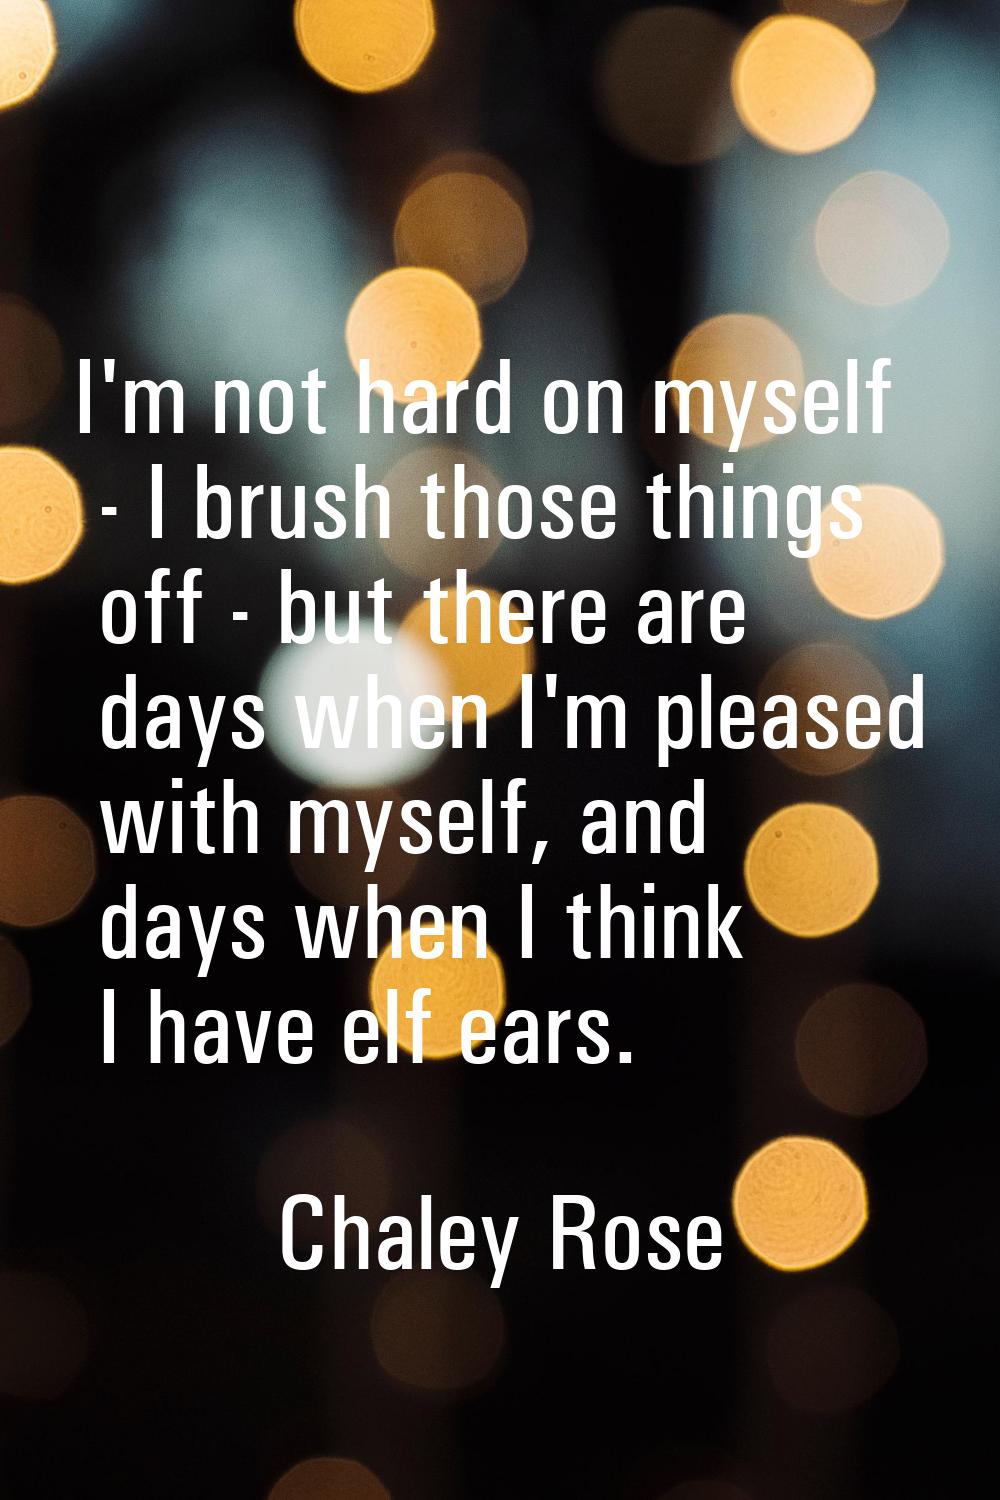 I'm not hard on myself - I brush those things off - but there are days when I'm pleased with myself